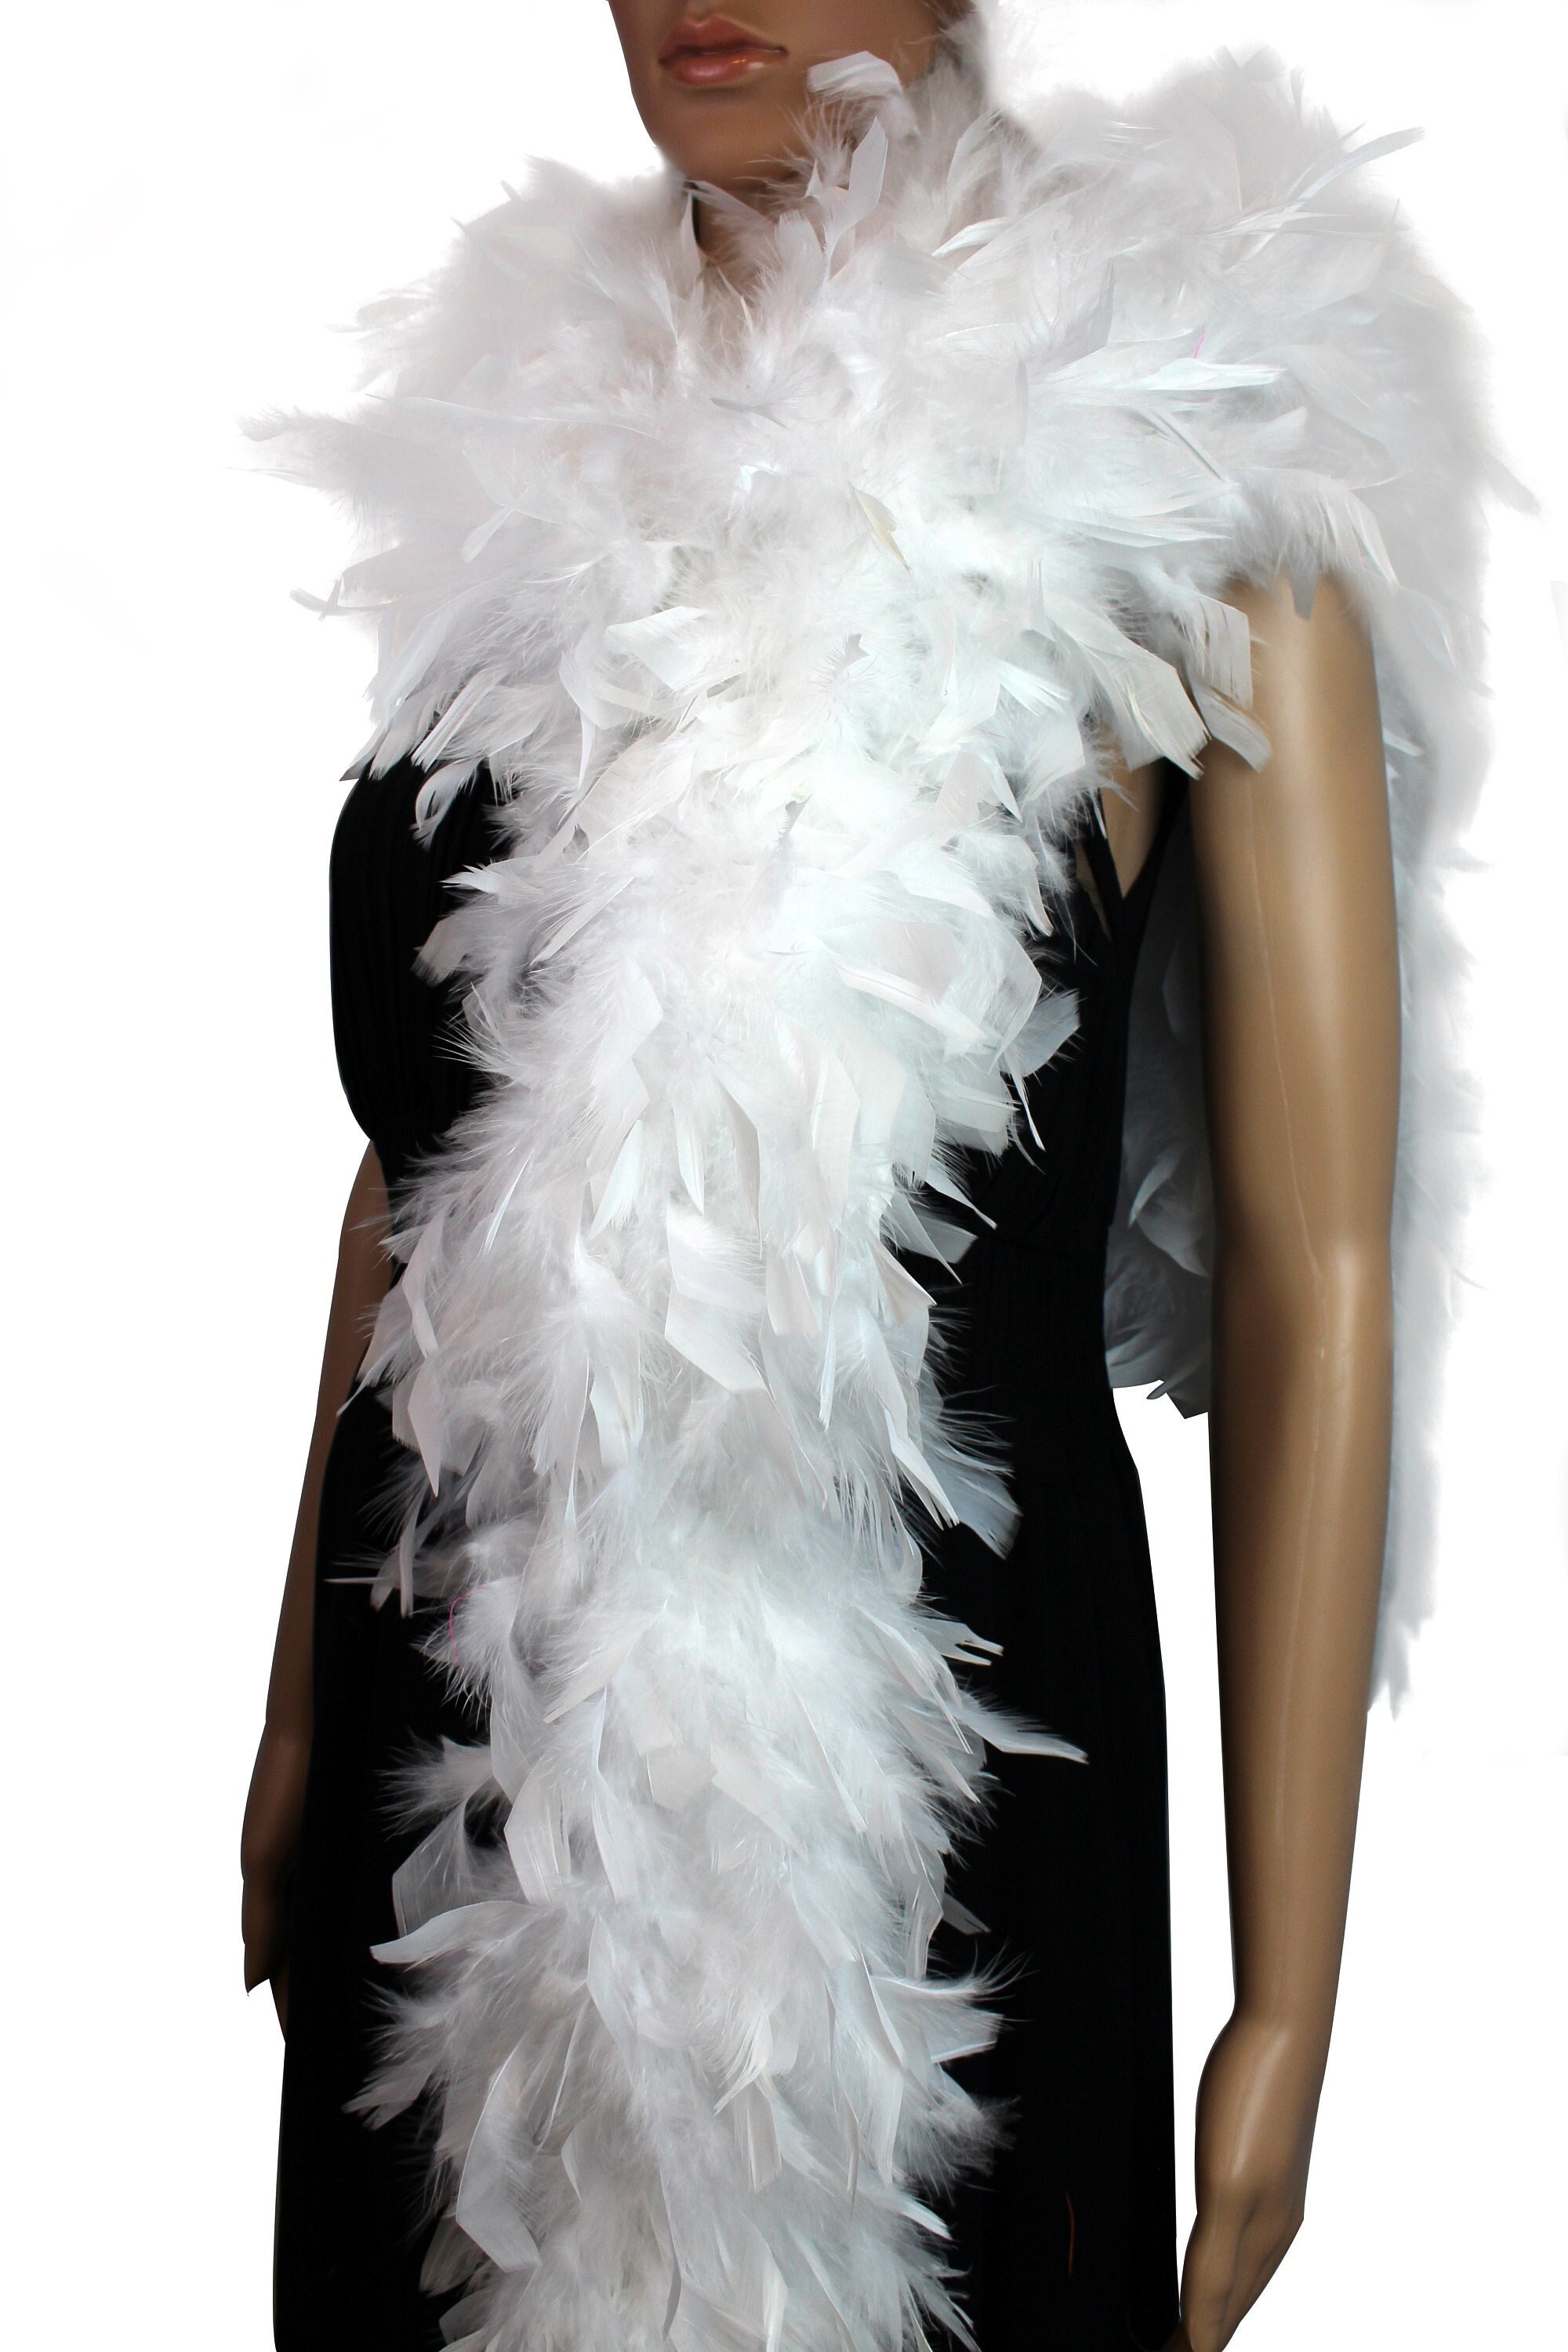 Feathers Boa Ostrich Feather White Fluffy Strips Feather Boa For Party  Wedding Dress Decoration - 2 Yards Turkey Feathers For Crafts Long Feather  Cost